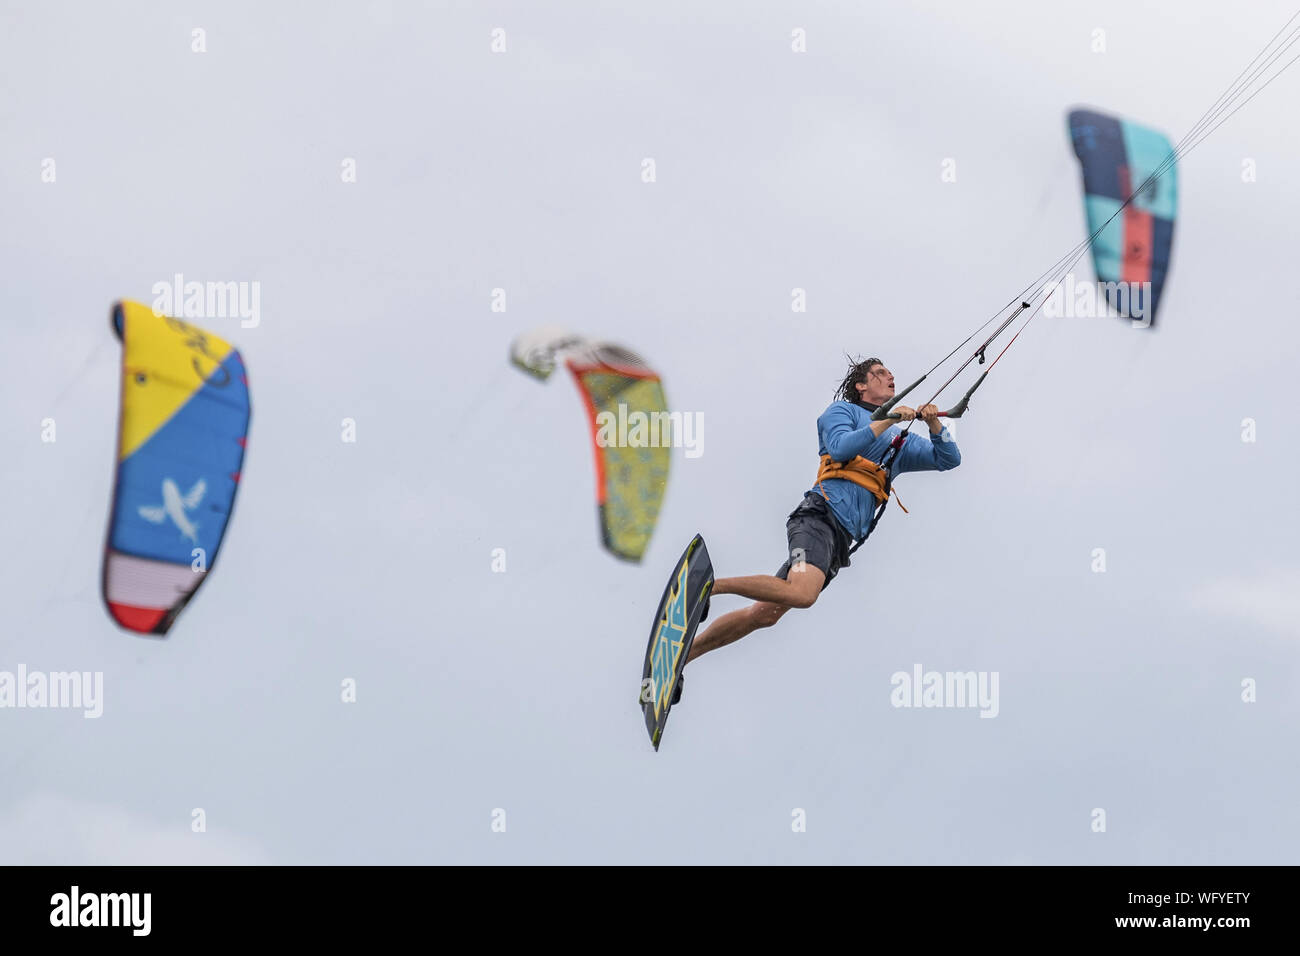 USA. 31st Aug, 2019. A kite boarder catches air as strong winds reach the Atlantic coast of Charleston ahead of Hurricane Dorian on Saturday, August 31, 2019 in Sullivans Island, South Carolina. The category 4 storm is expected to hit the Bahamas and then move north along the Eastern Seaboard. Credit: UPI/Alamy Live News Stock Photo